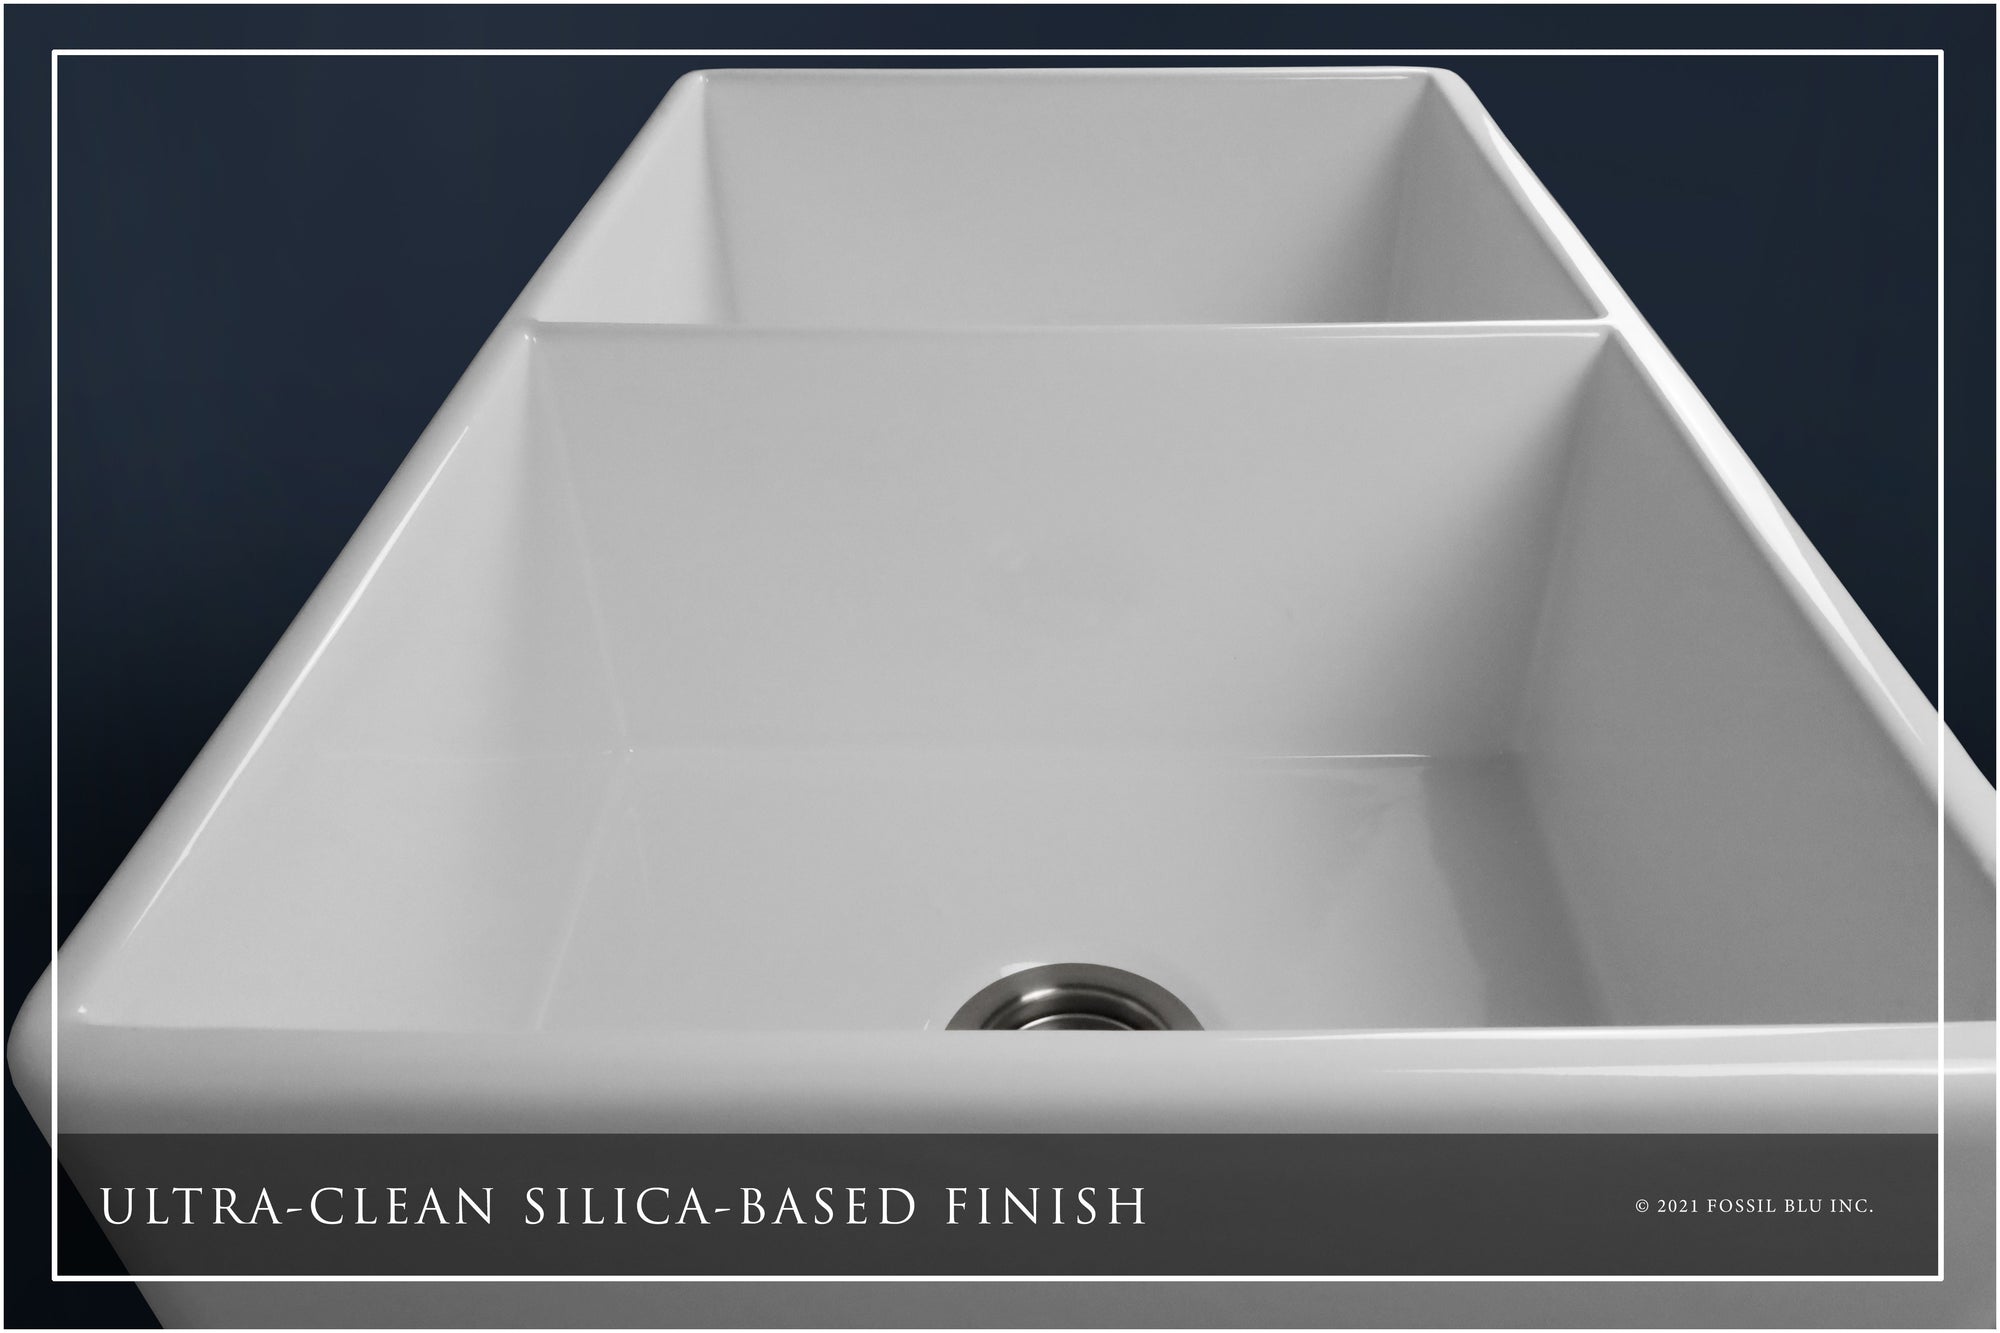 FSW1012 LUXURY 33-INCH SOLID FIRECLAY FARMHOUSE SINK IN WHITE, STAINLESS STEEL ACCS, BELTED FRONT